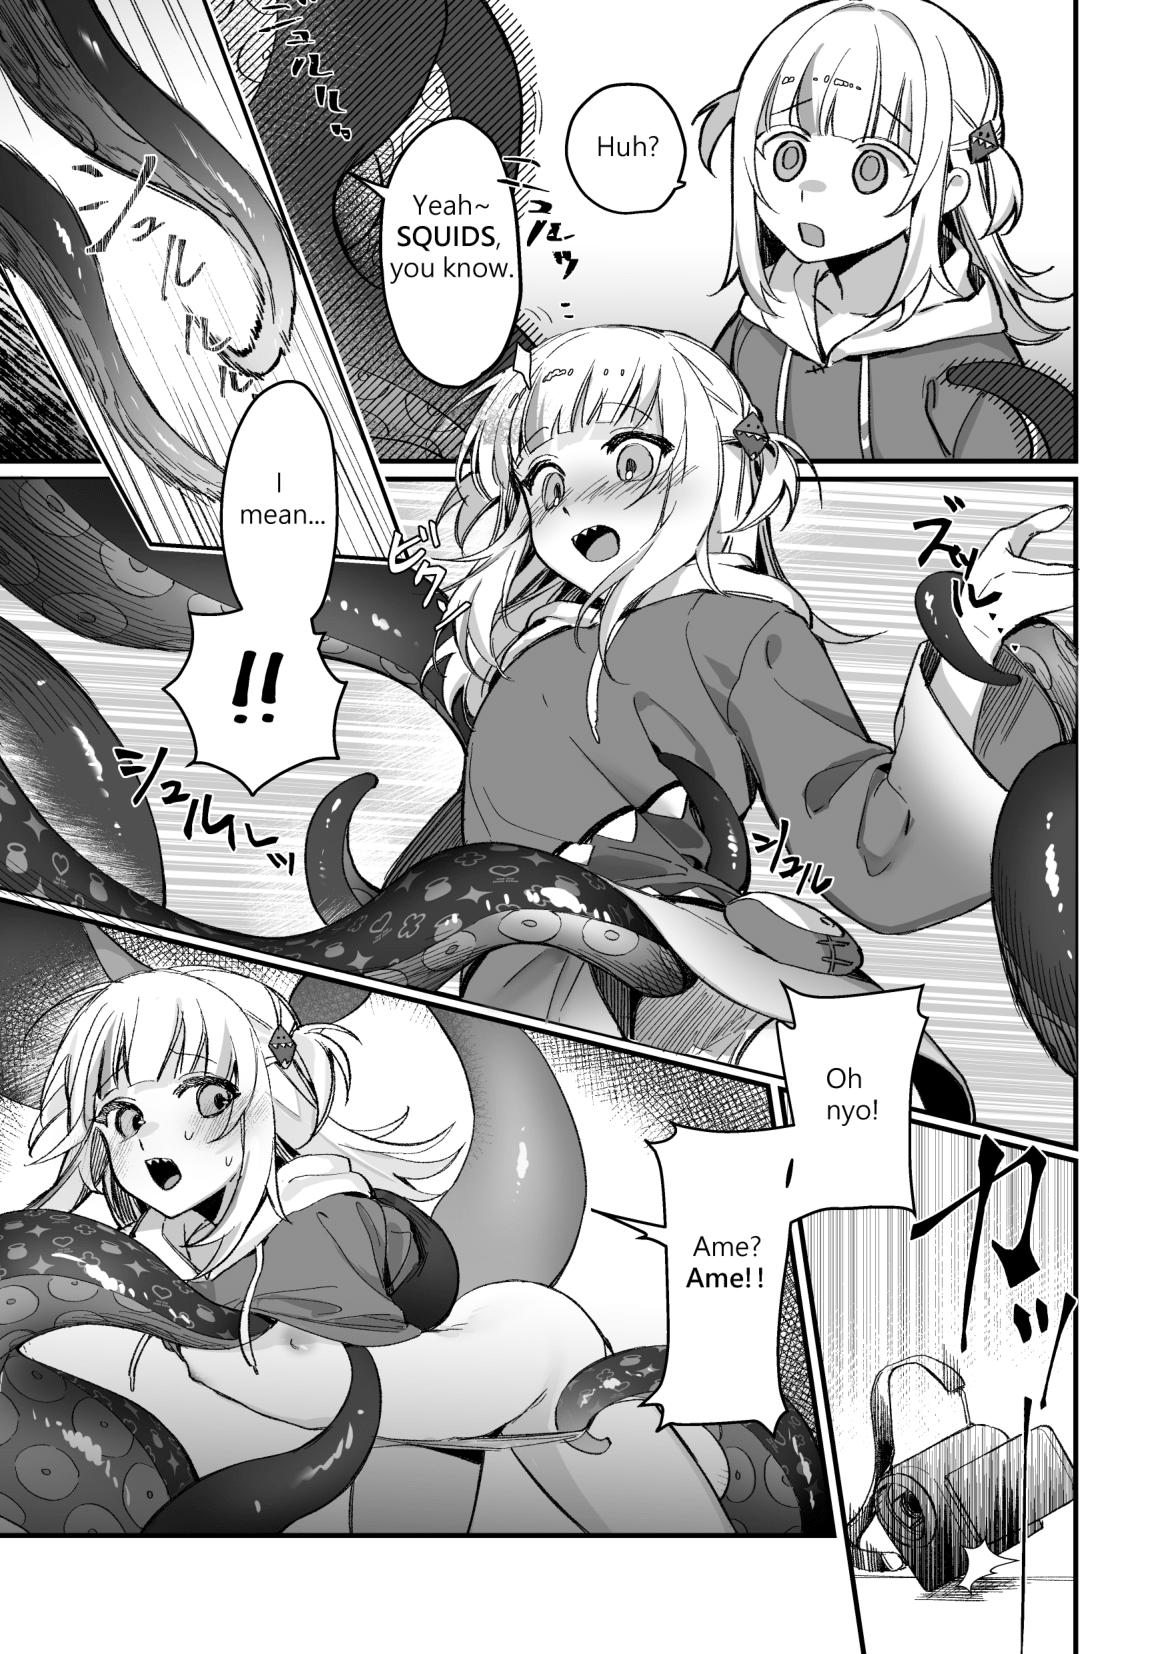 Cogida 【R-18 Comic】Tentacle!! Ina's Boing Boing is out of control!! - Hololive Audition - Page 5